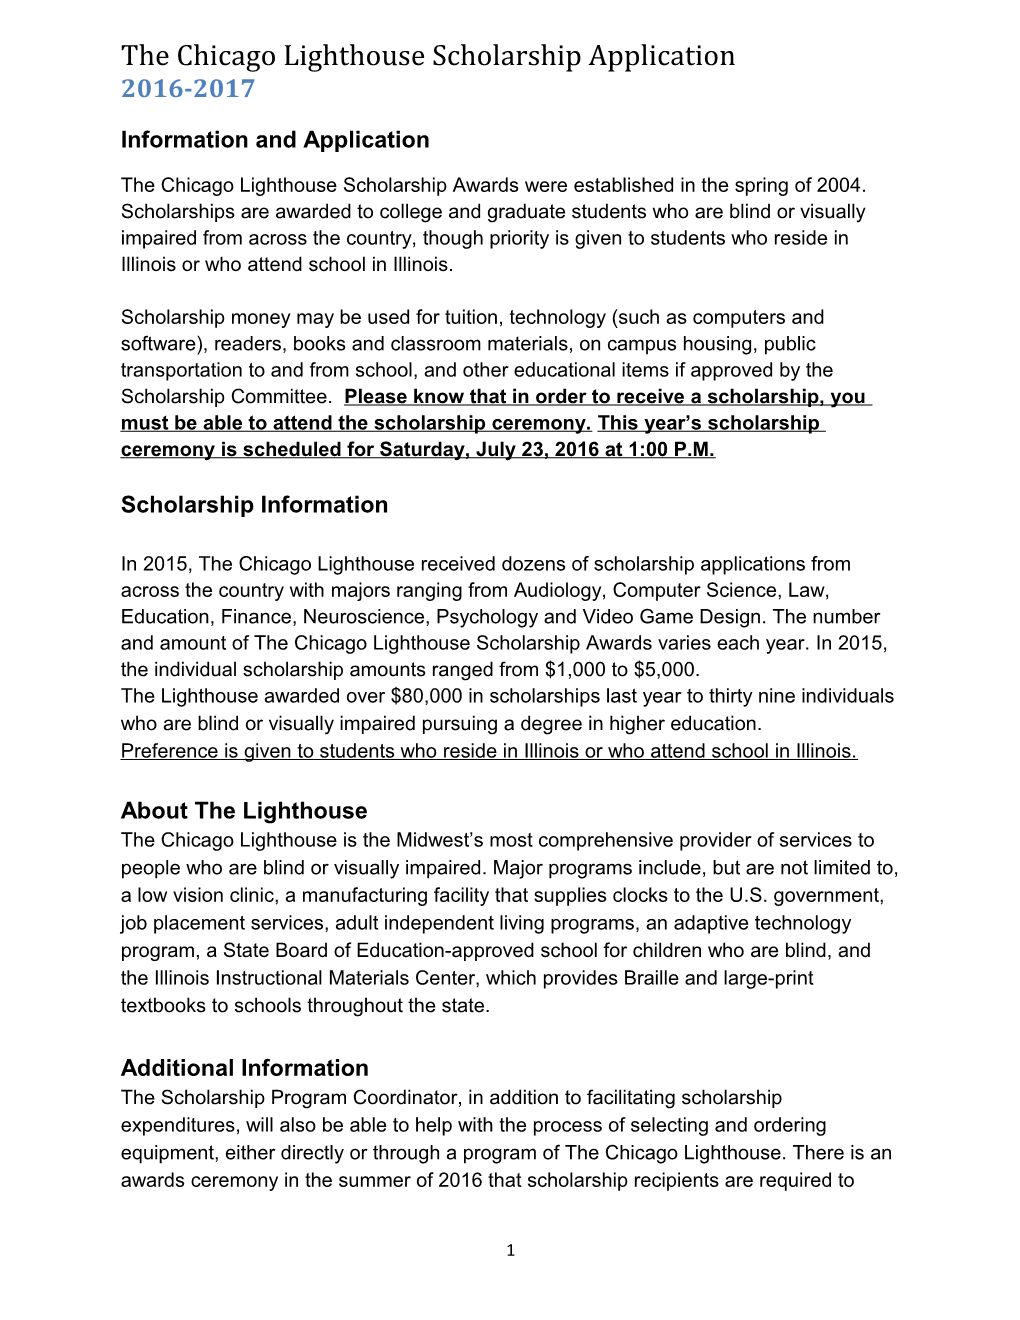 The Chicago Lighthouse Scholarship Application